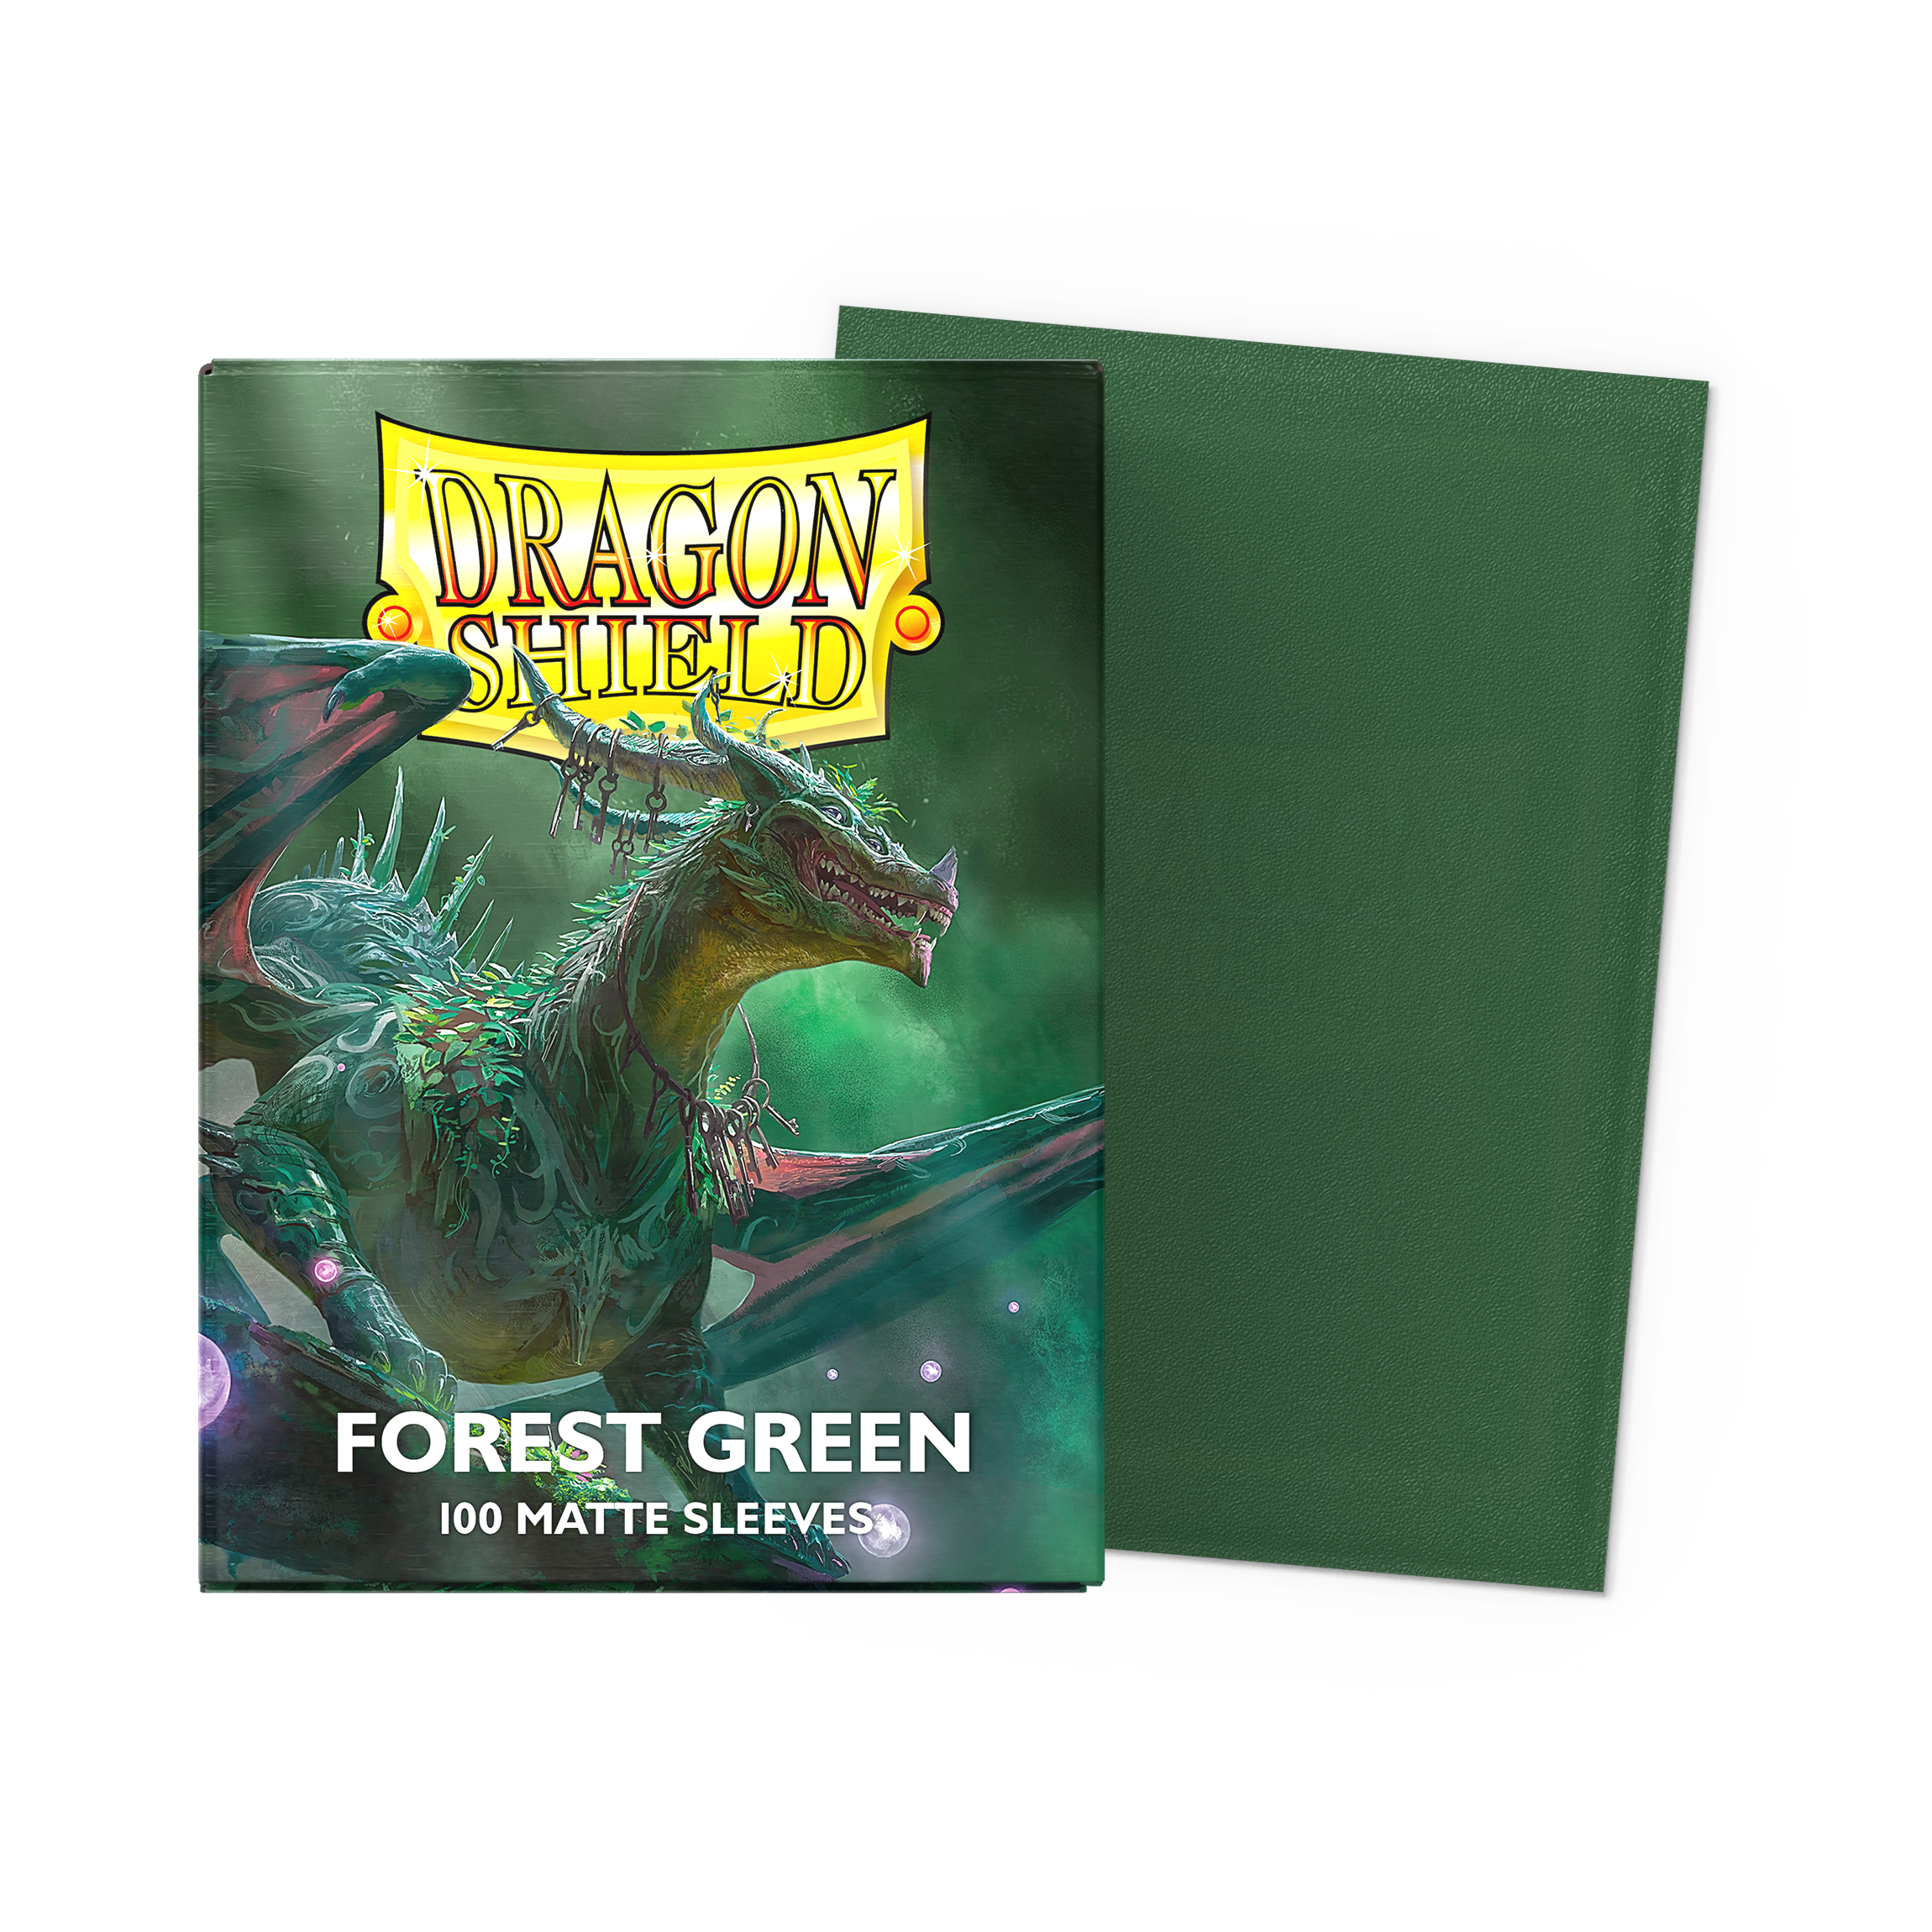 Dragon Shield Inner Sleeves - Perfect Fit (standard size)